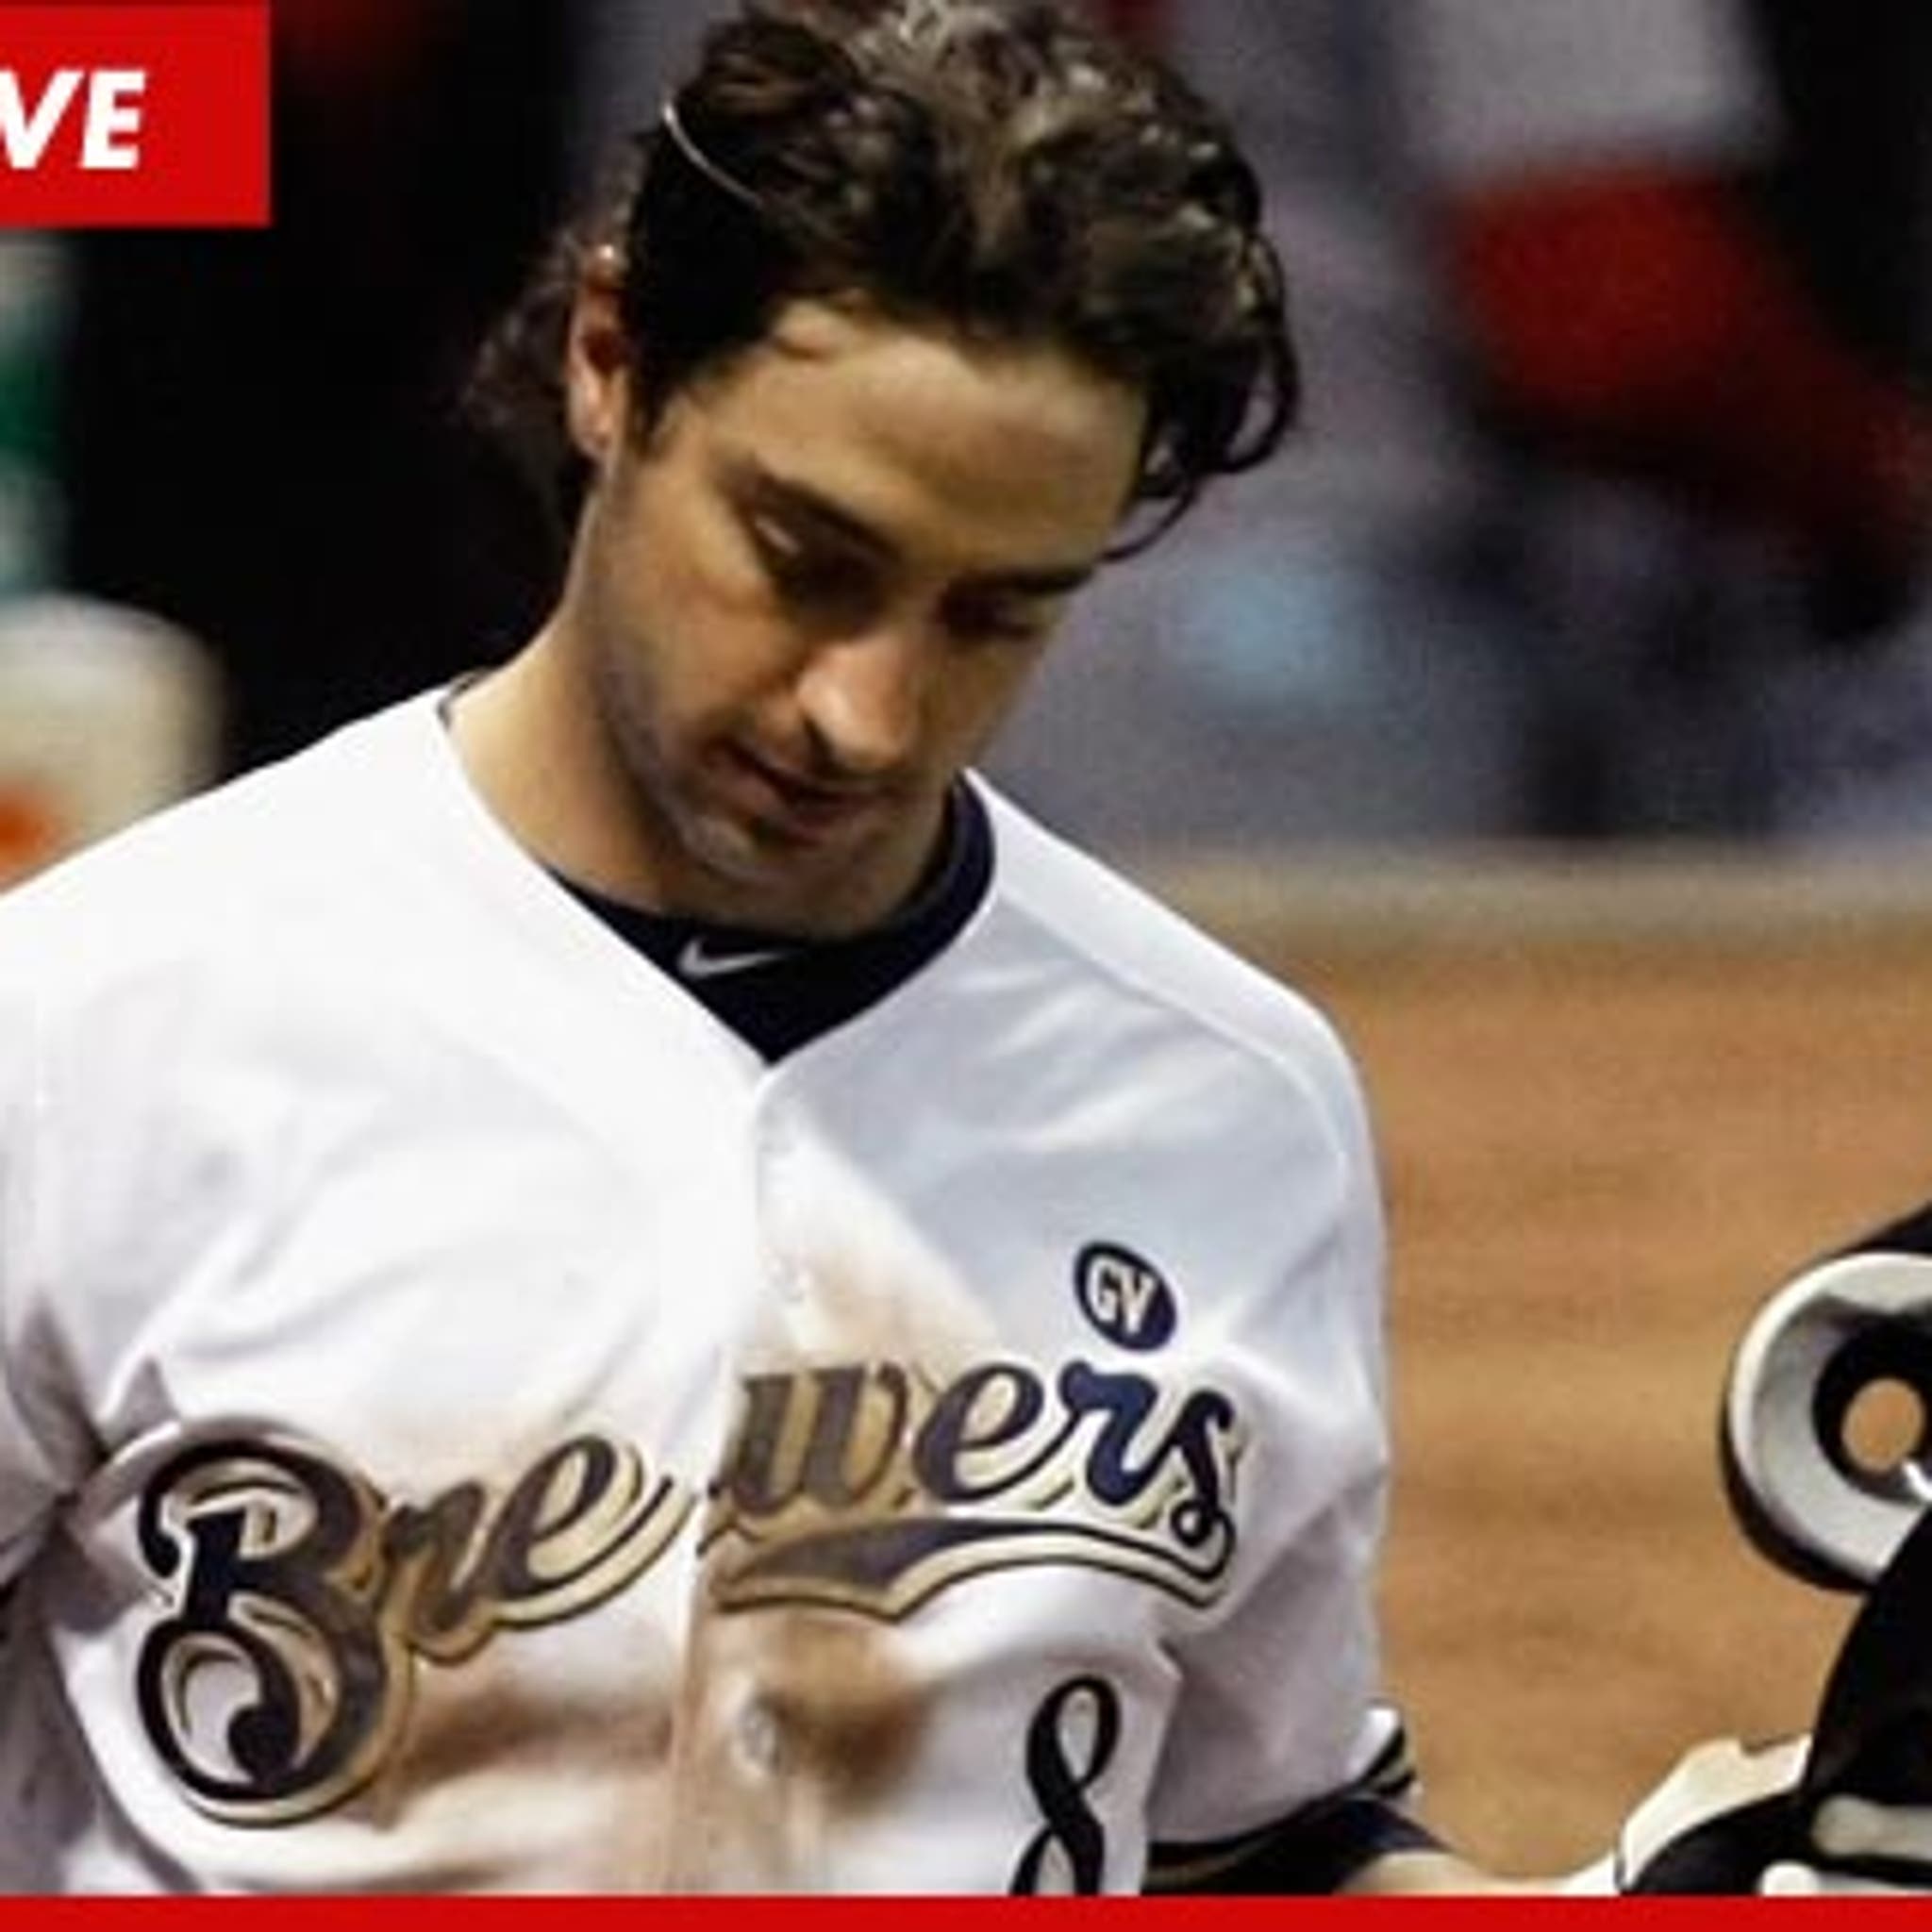 Ryan Braun wins the appeal of his drug suspension - NBC Sports